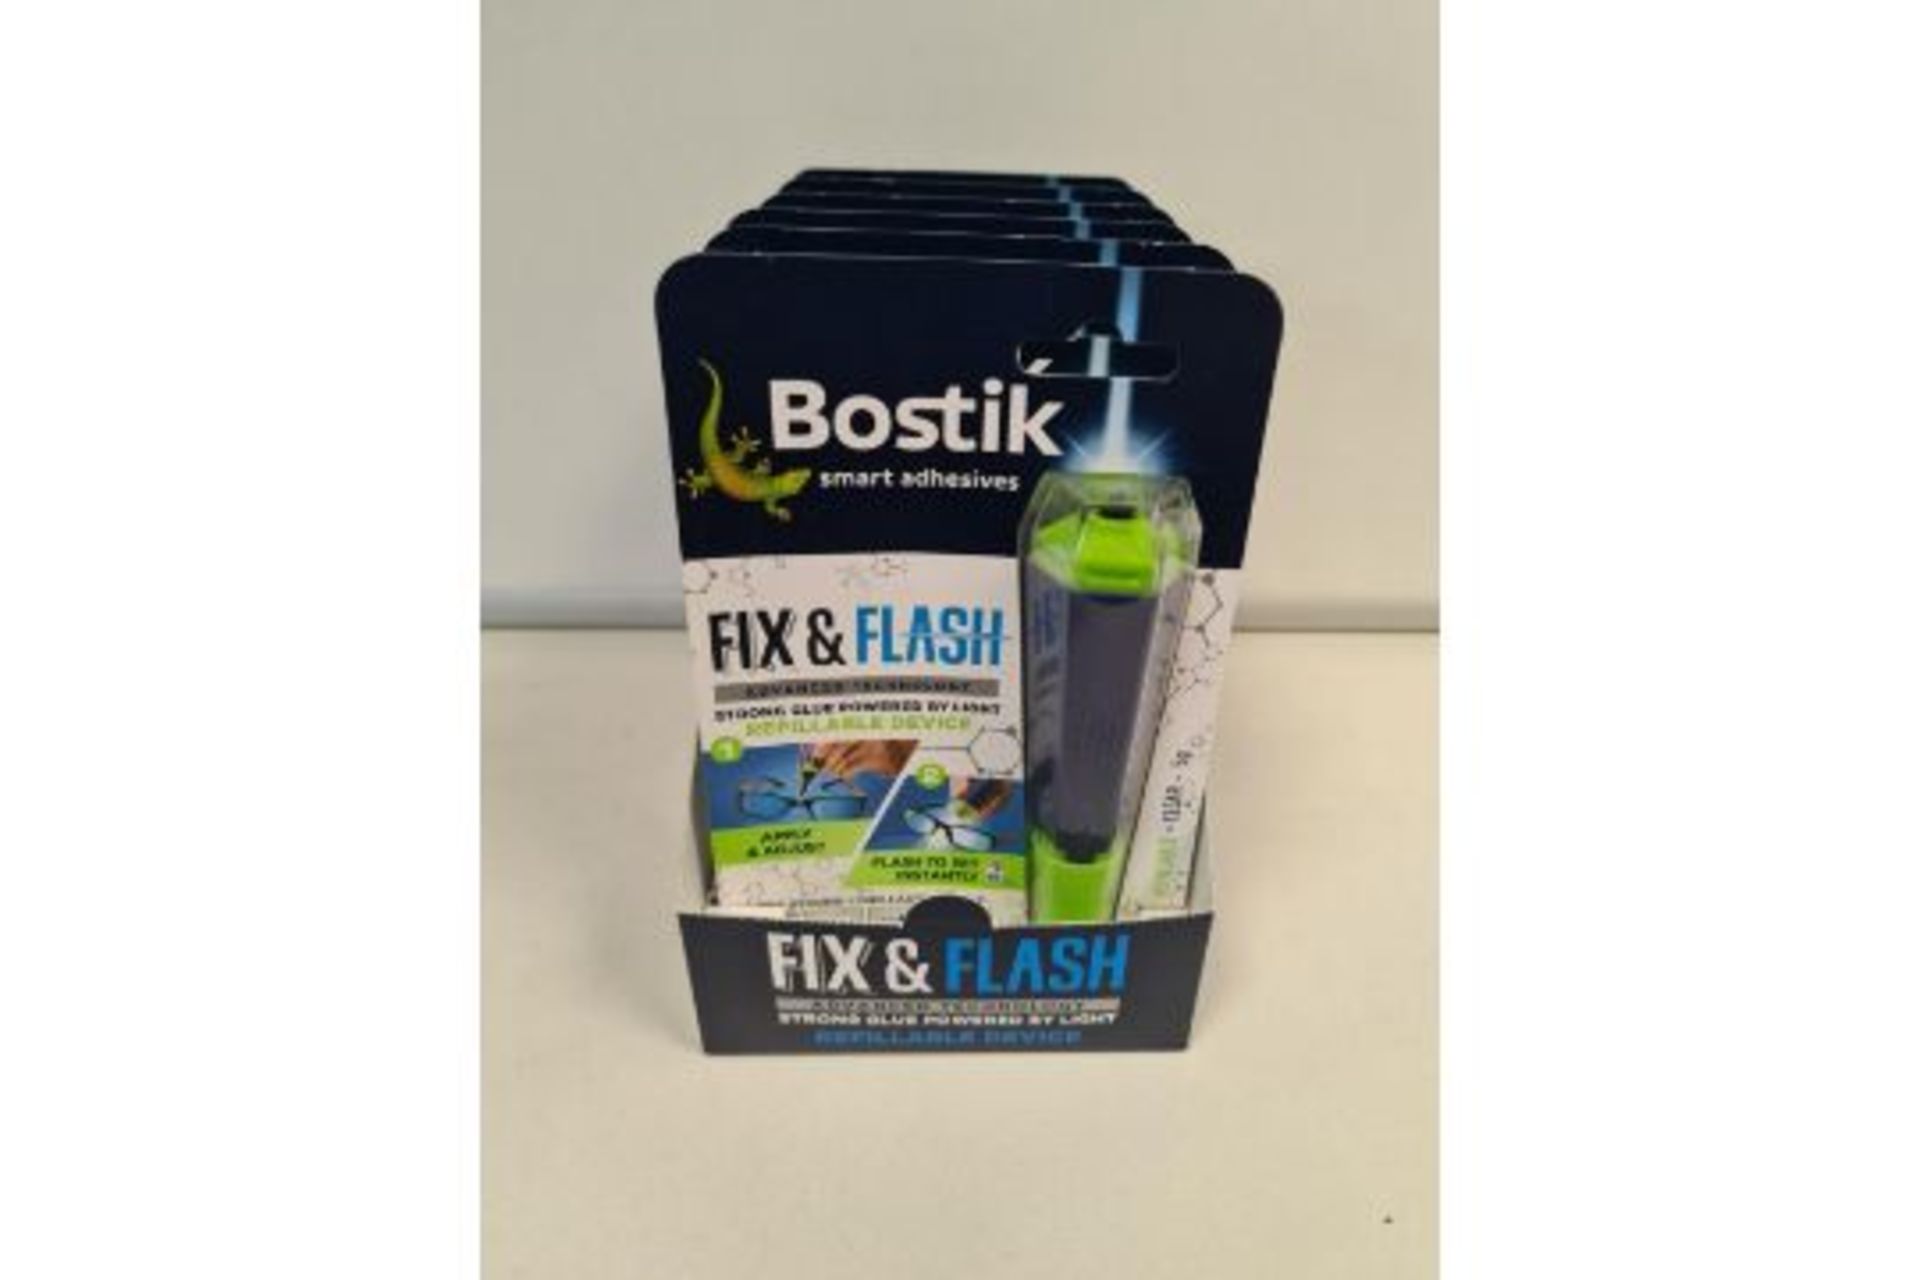 60 x BRAND NEW BOSTIK FIX & FLASH STRONG GLUE POWERED BY LIGHT